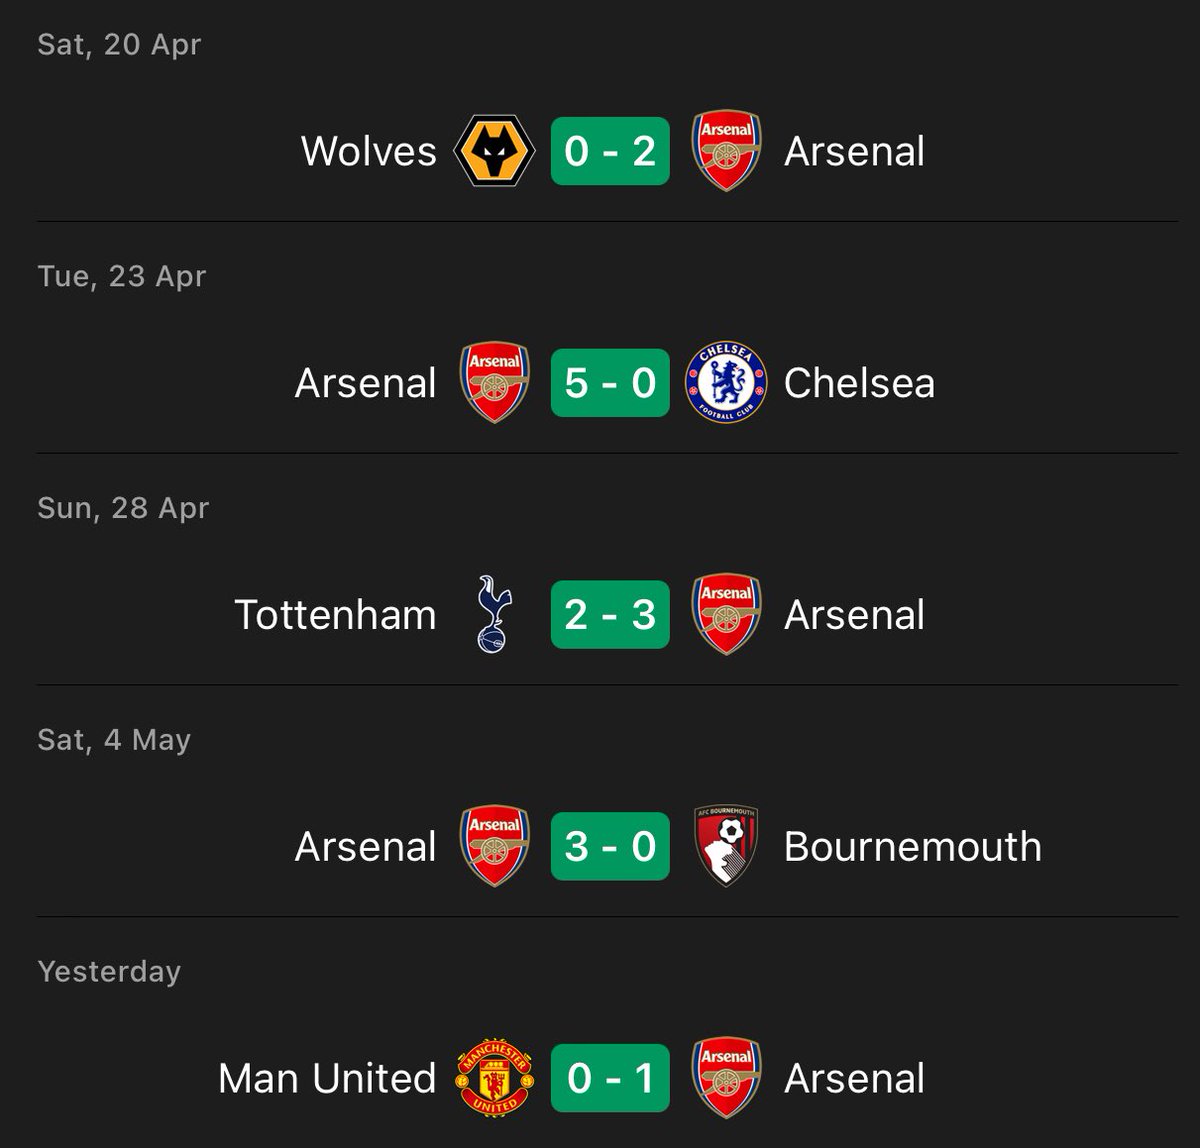 Arsenal are the only team in the league who could get through this set of fixtures 15/15, no other team this season is doing this